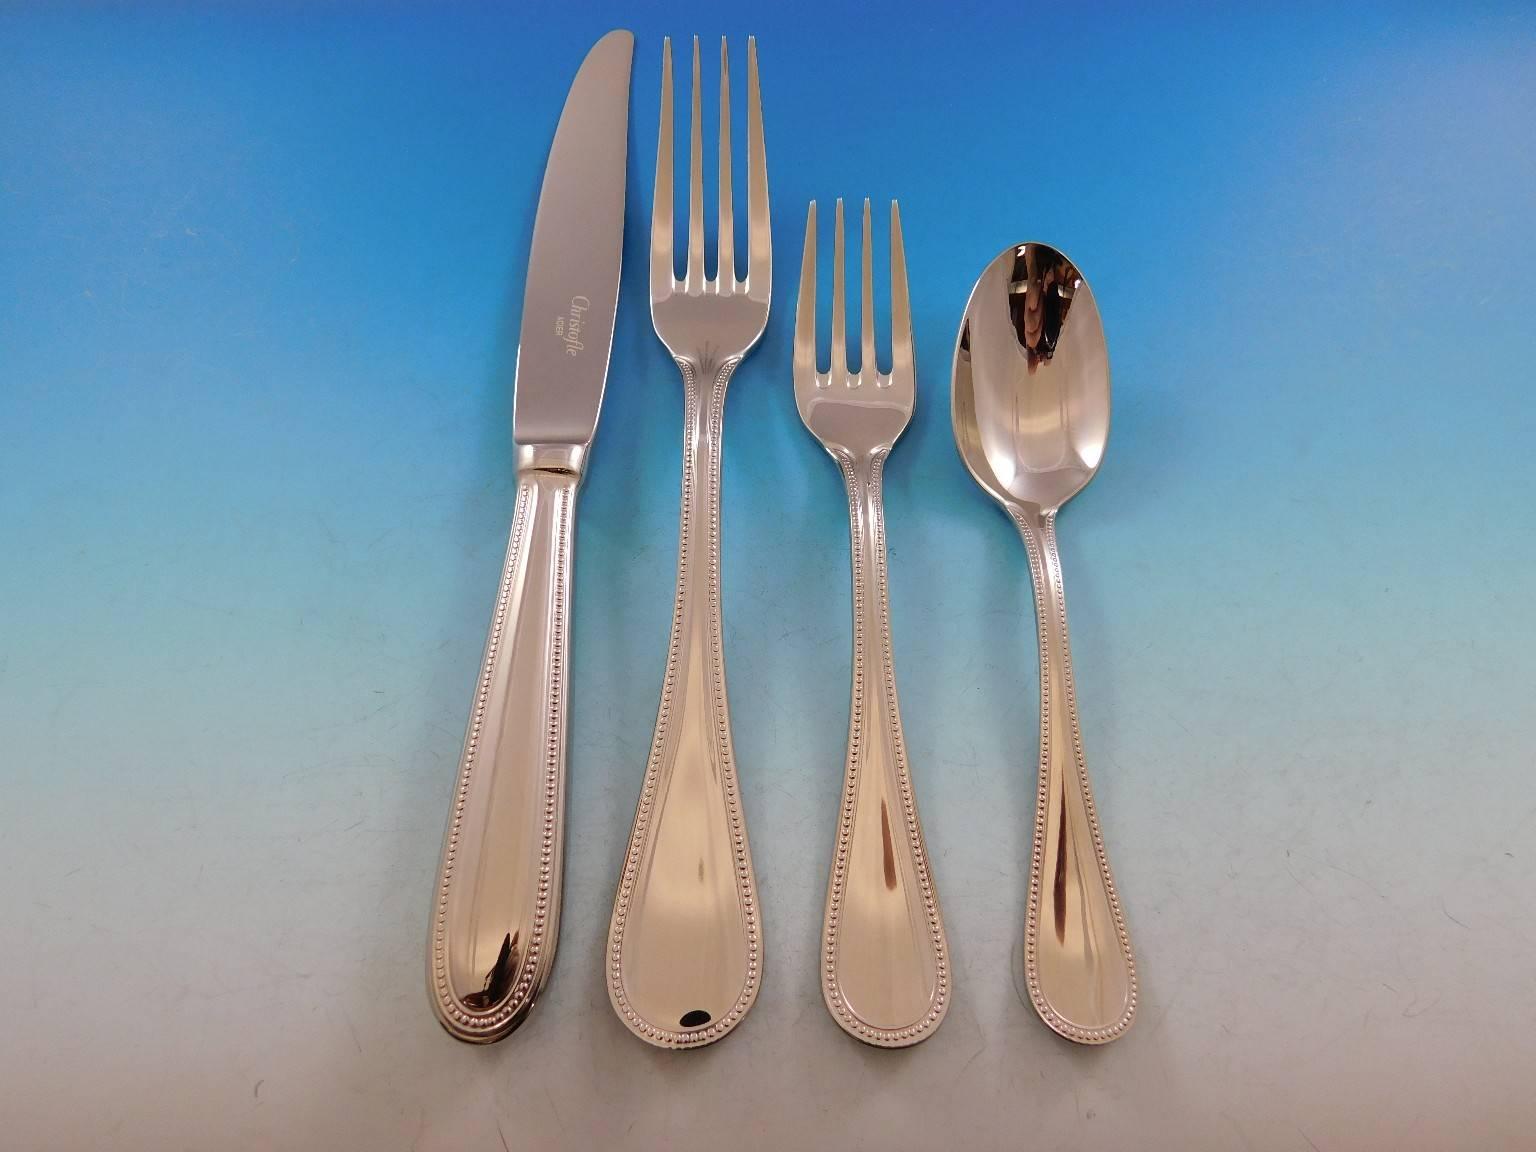 This New Perles by Christofle stainless steel flatware set includes:

12 dinner knives, 9 1/2